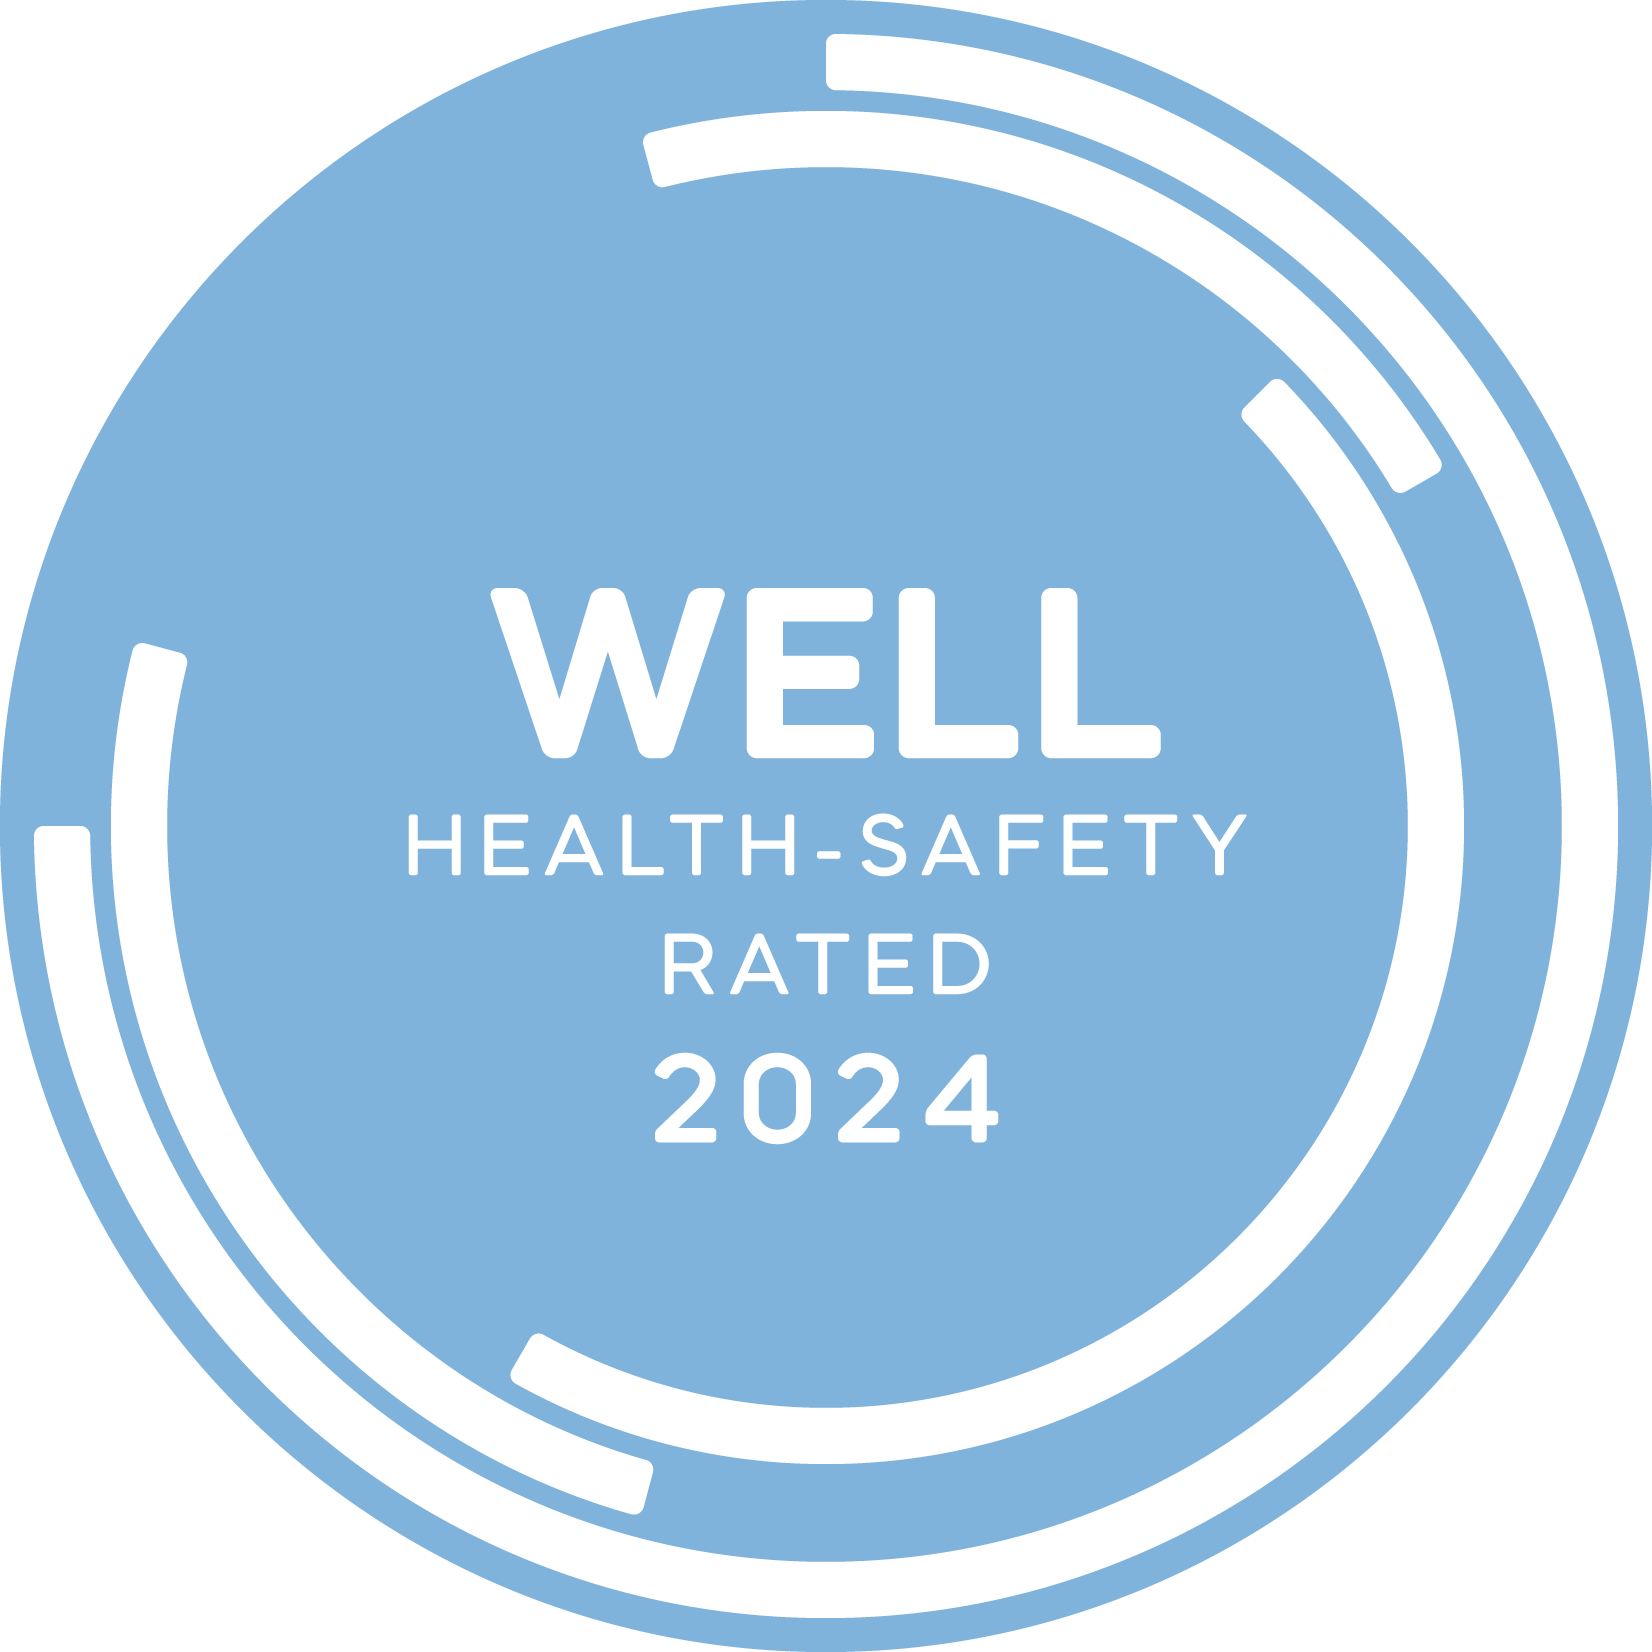 WELL Health-Safety Rated 2024